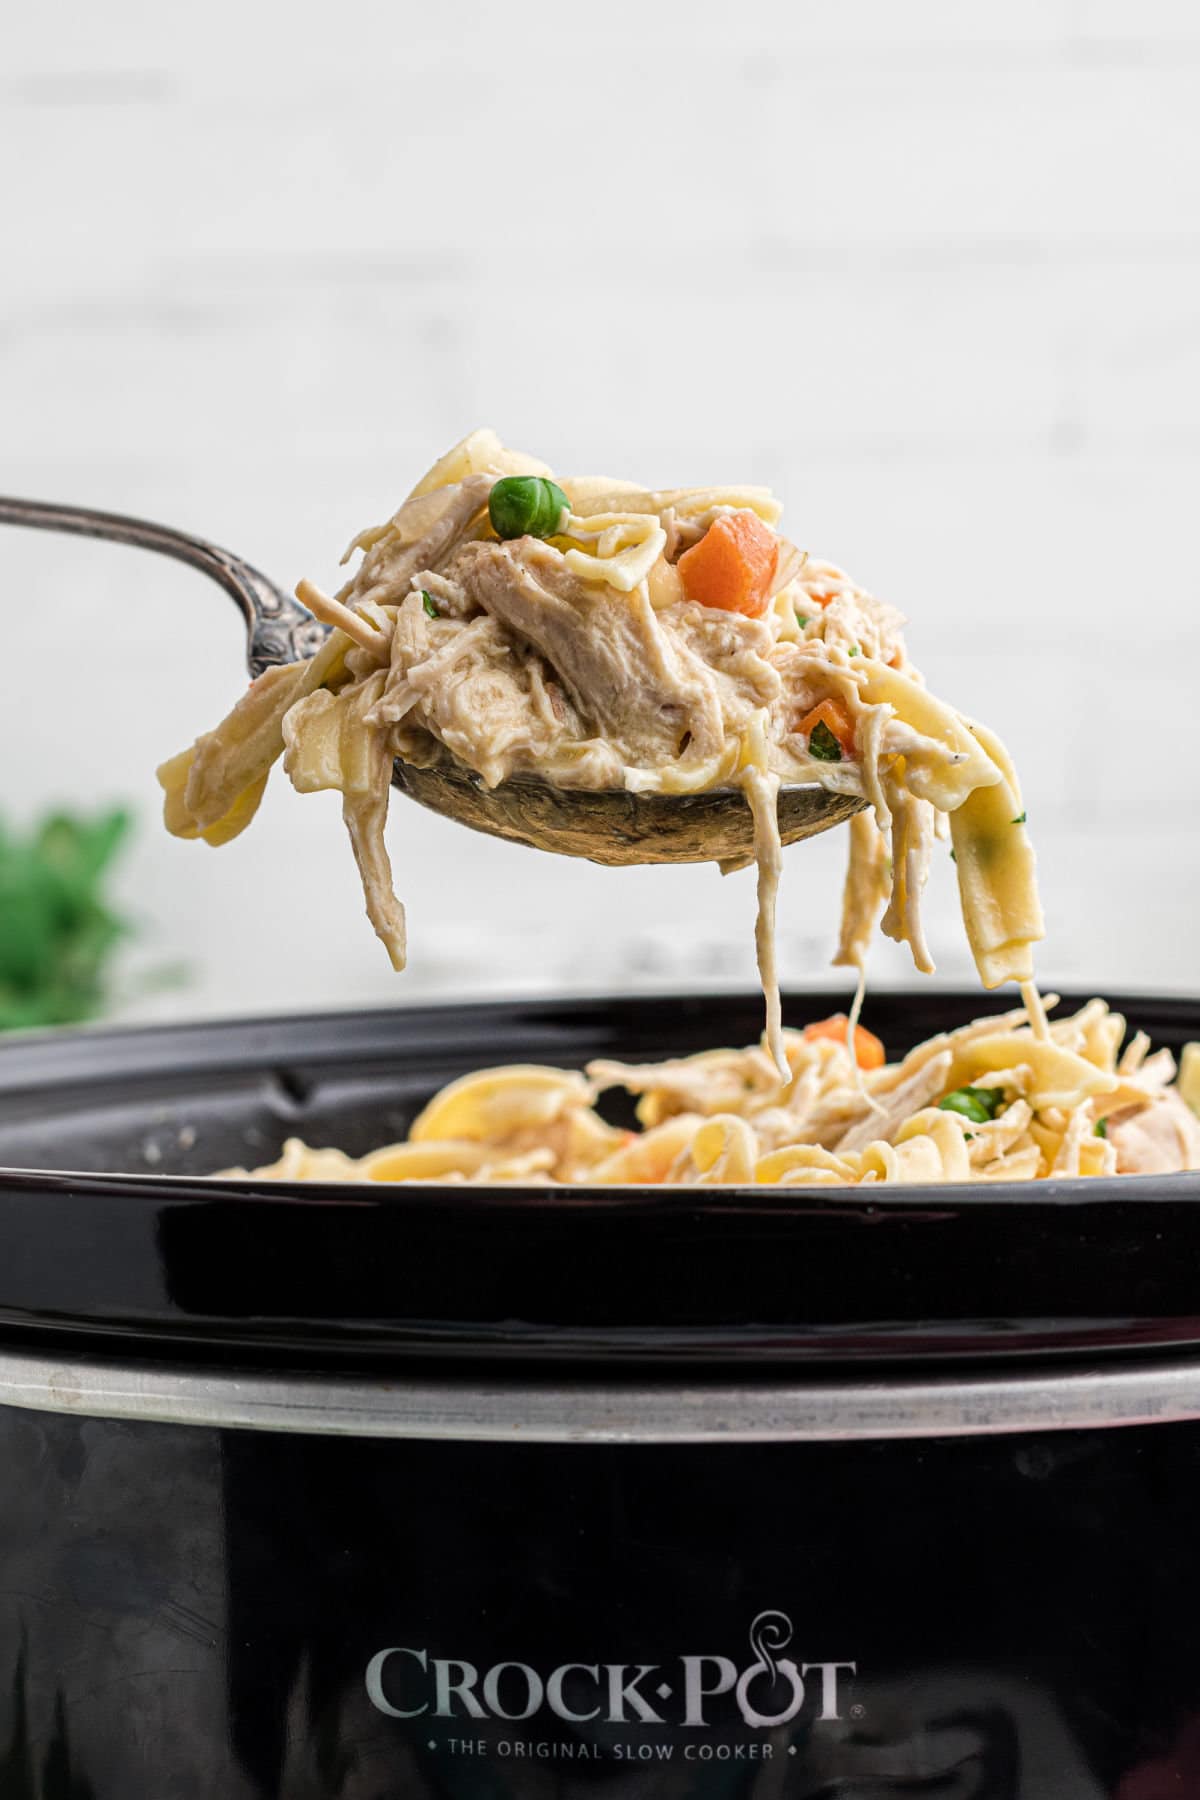 A serving spoon filled with chicken and noodles being lifted from the crockpot.